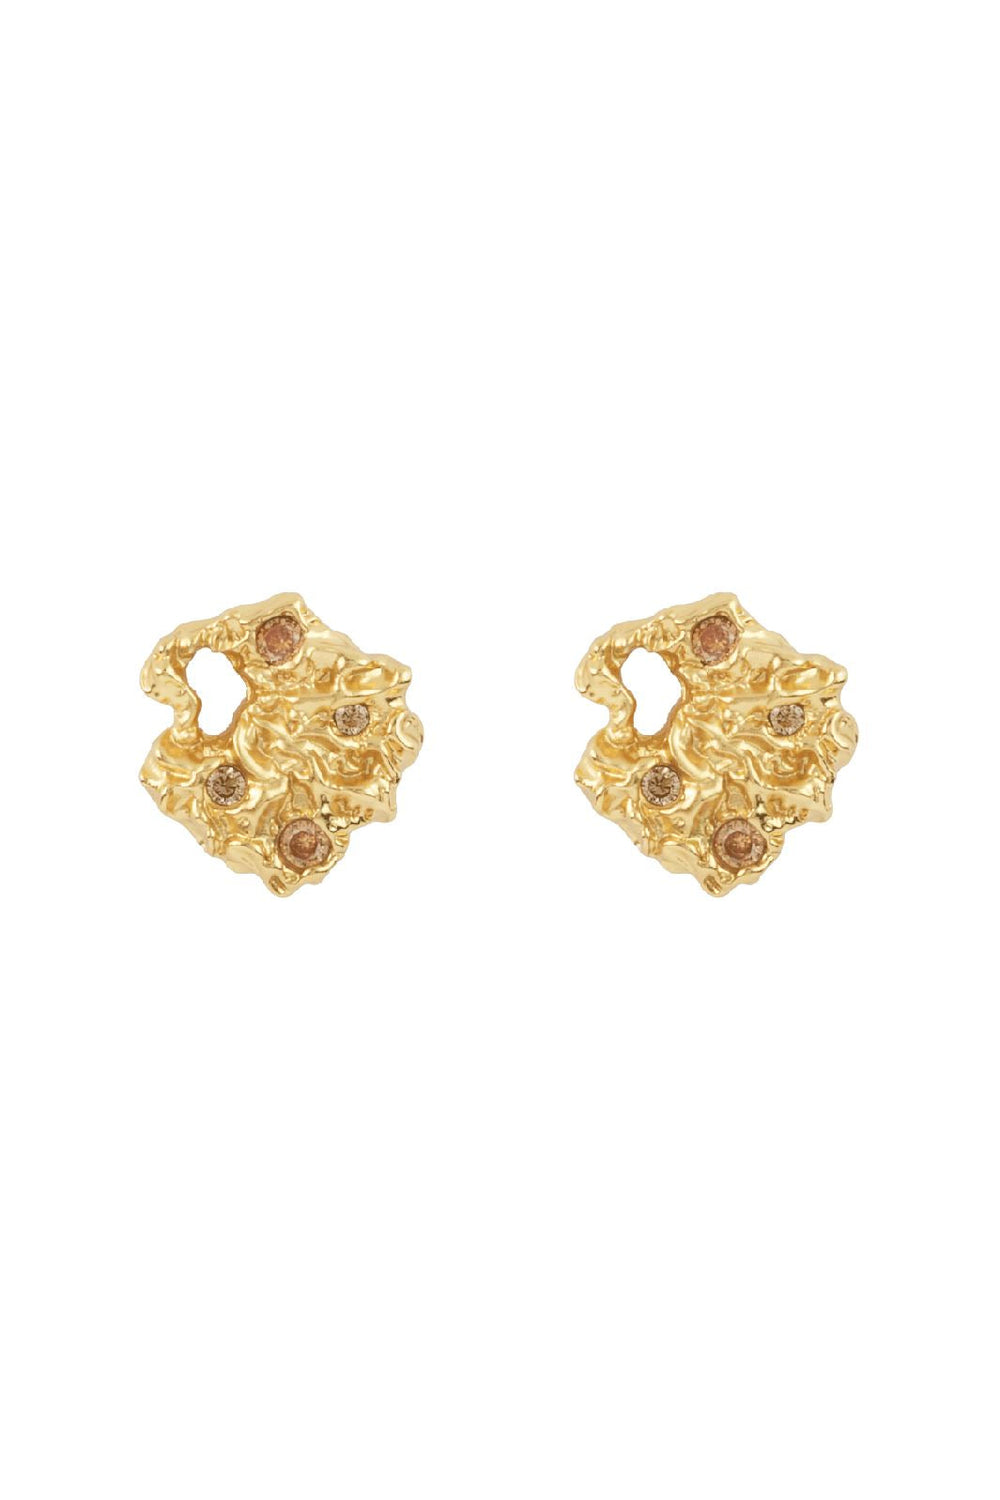 House Of Vincent - Mythical Fate Earrings - Gilded